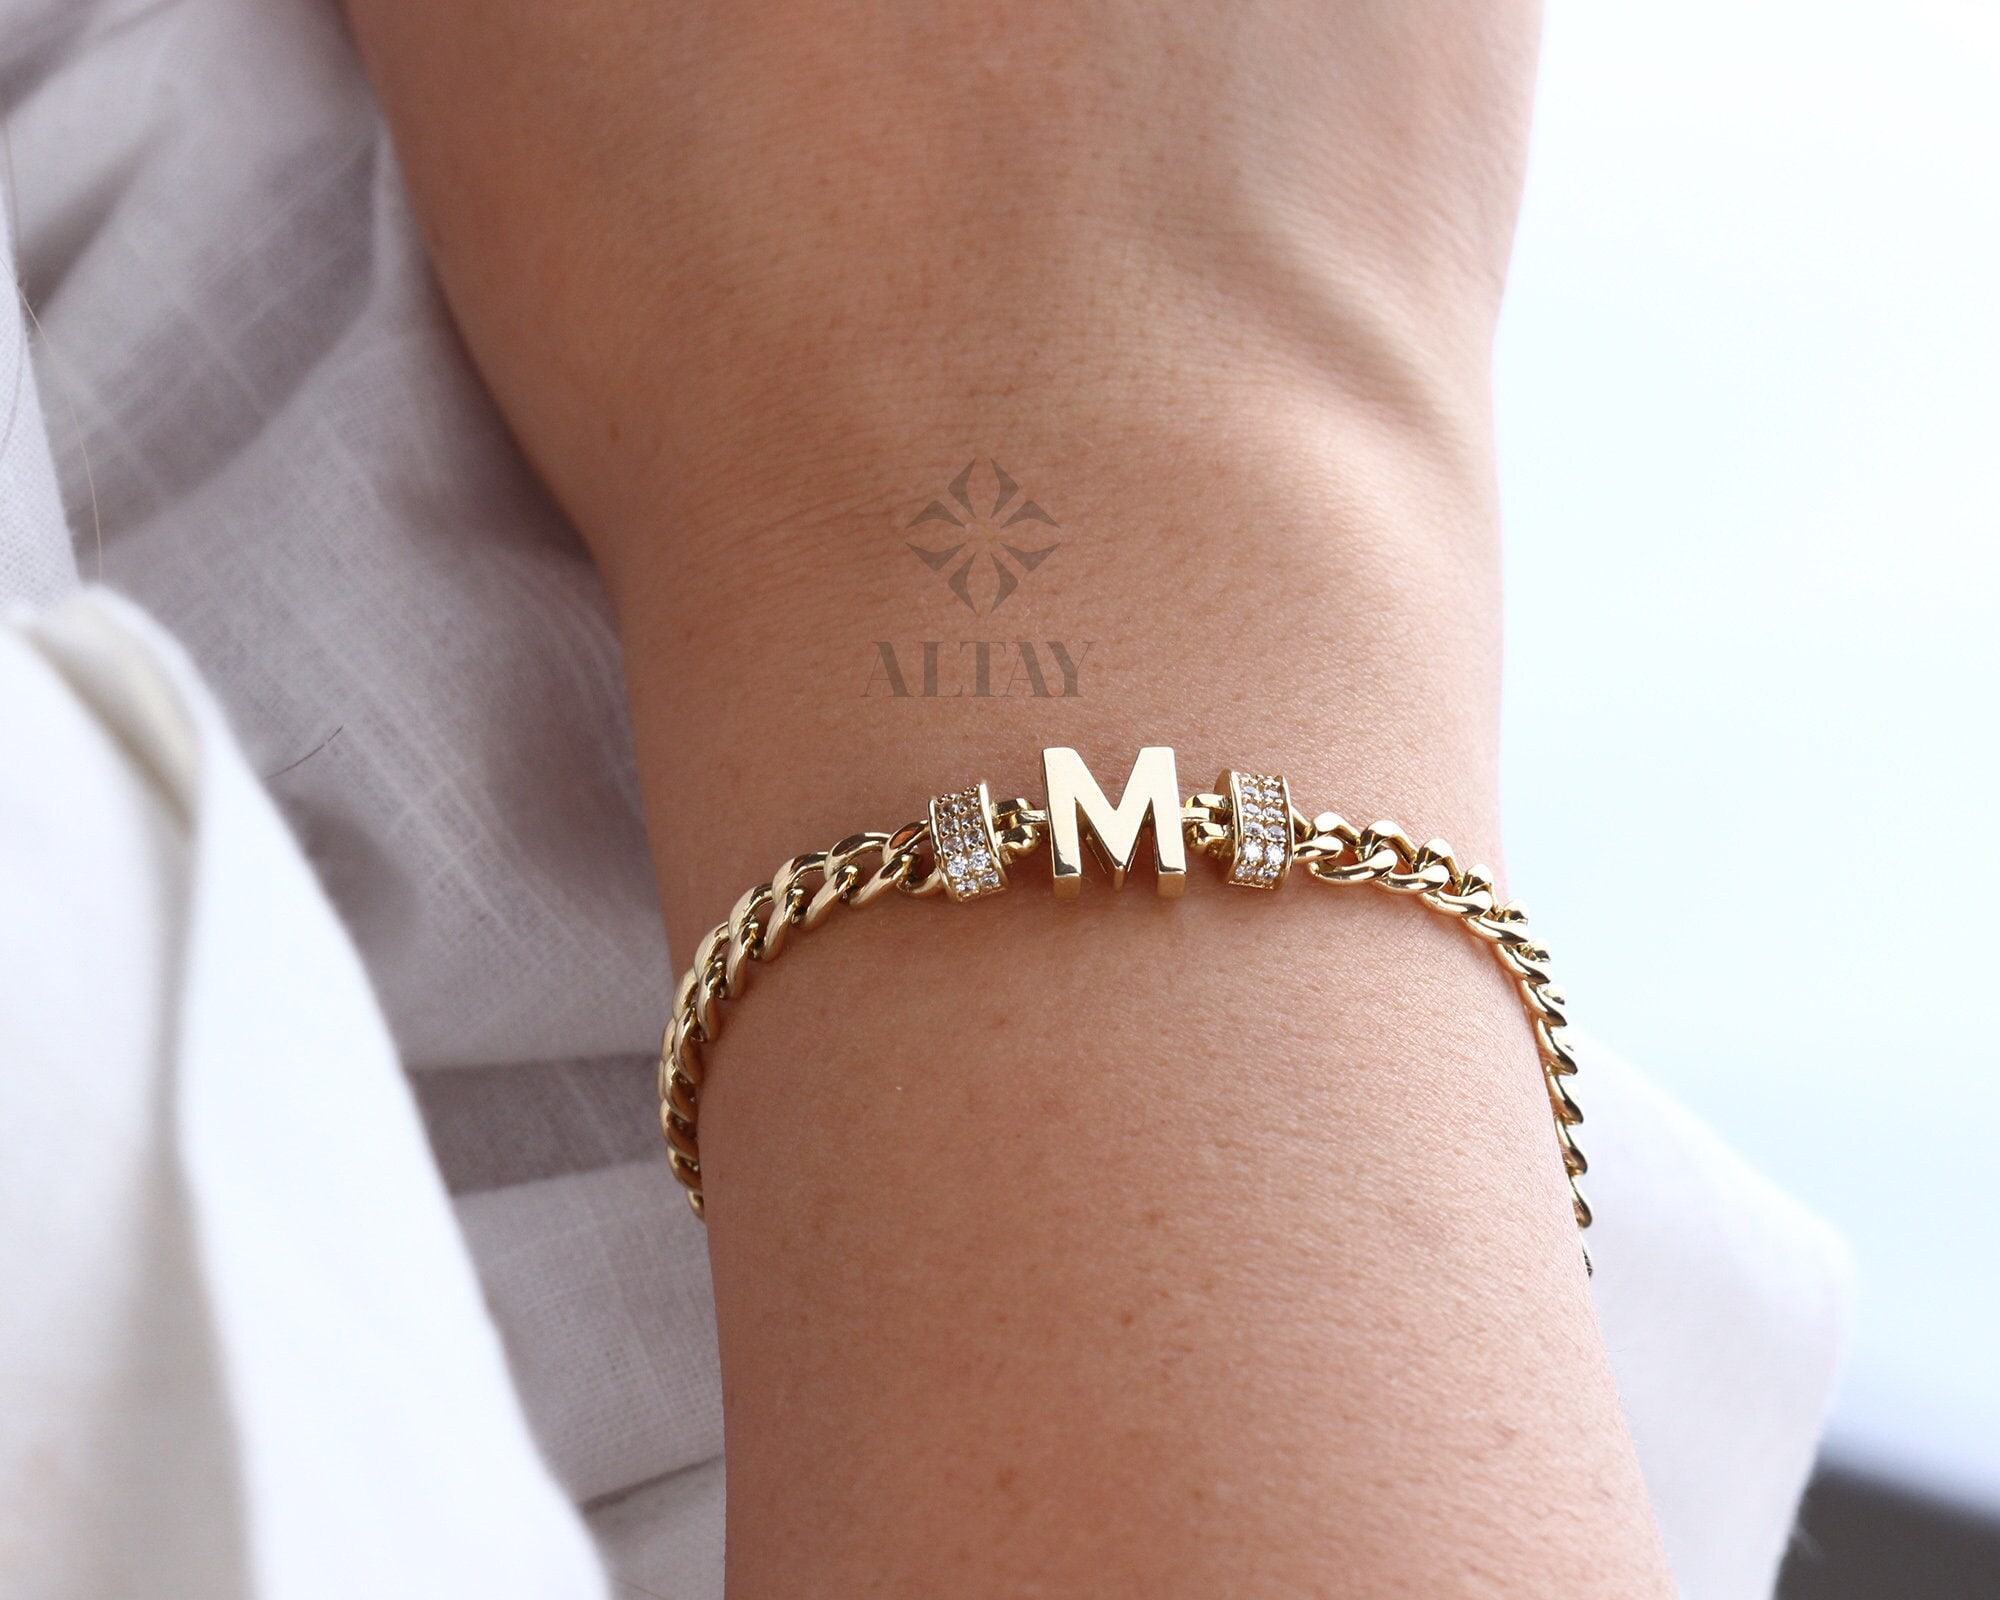 14K Yellow Gold Double Initial Bracelet, Solid Gold 2 Letter Bracelet, Personalized Yellow Gold Bracelet, Initial Bracelet, Love Letter Bracelet